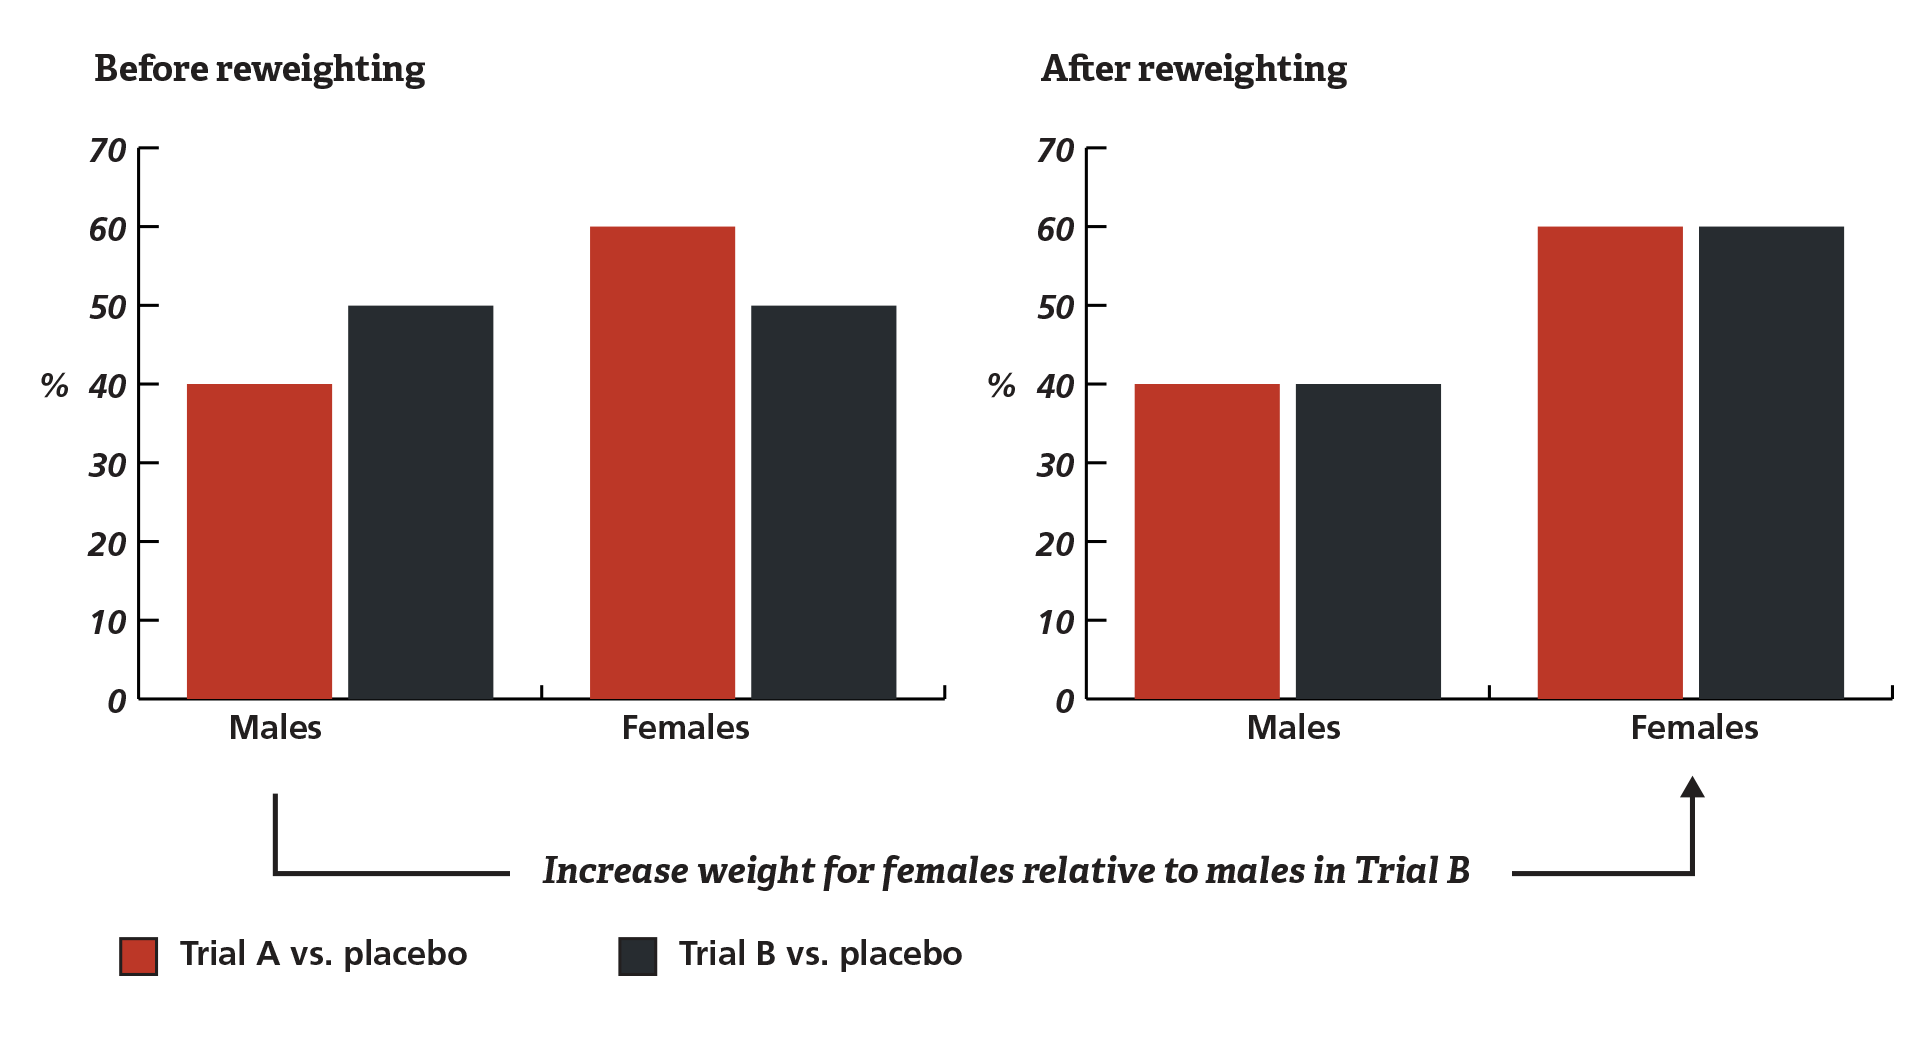 Figure 1. Reweighting Patients Based on Gender Differences